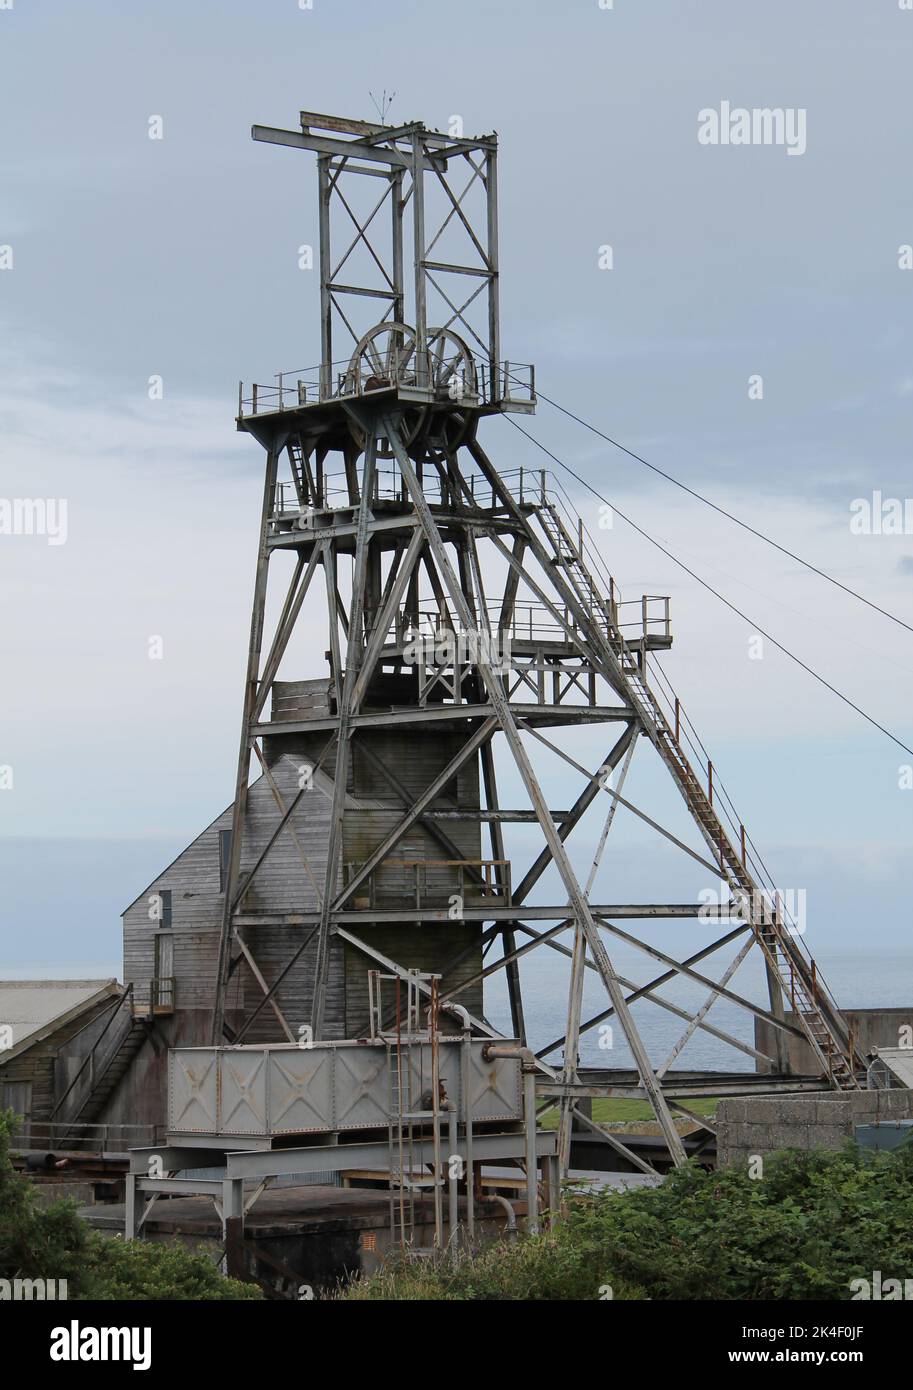 The Structure and Buildings of Old Mine Headstocks. Stock Photo